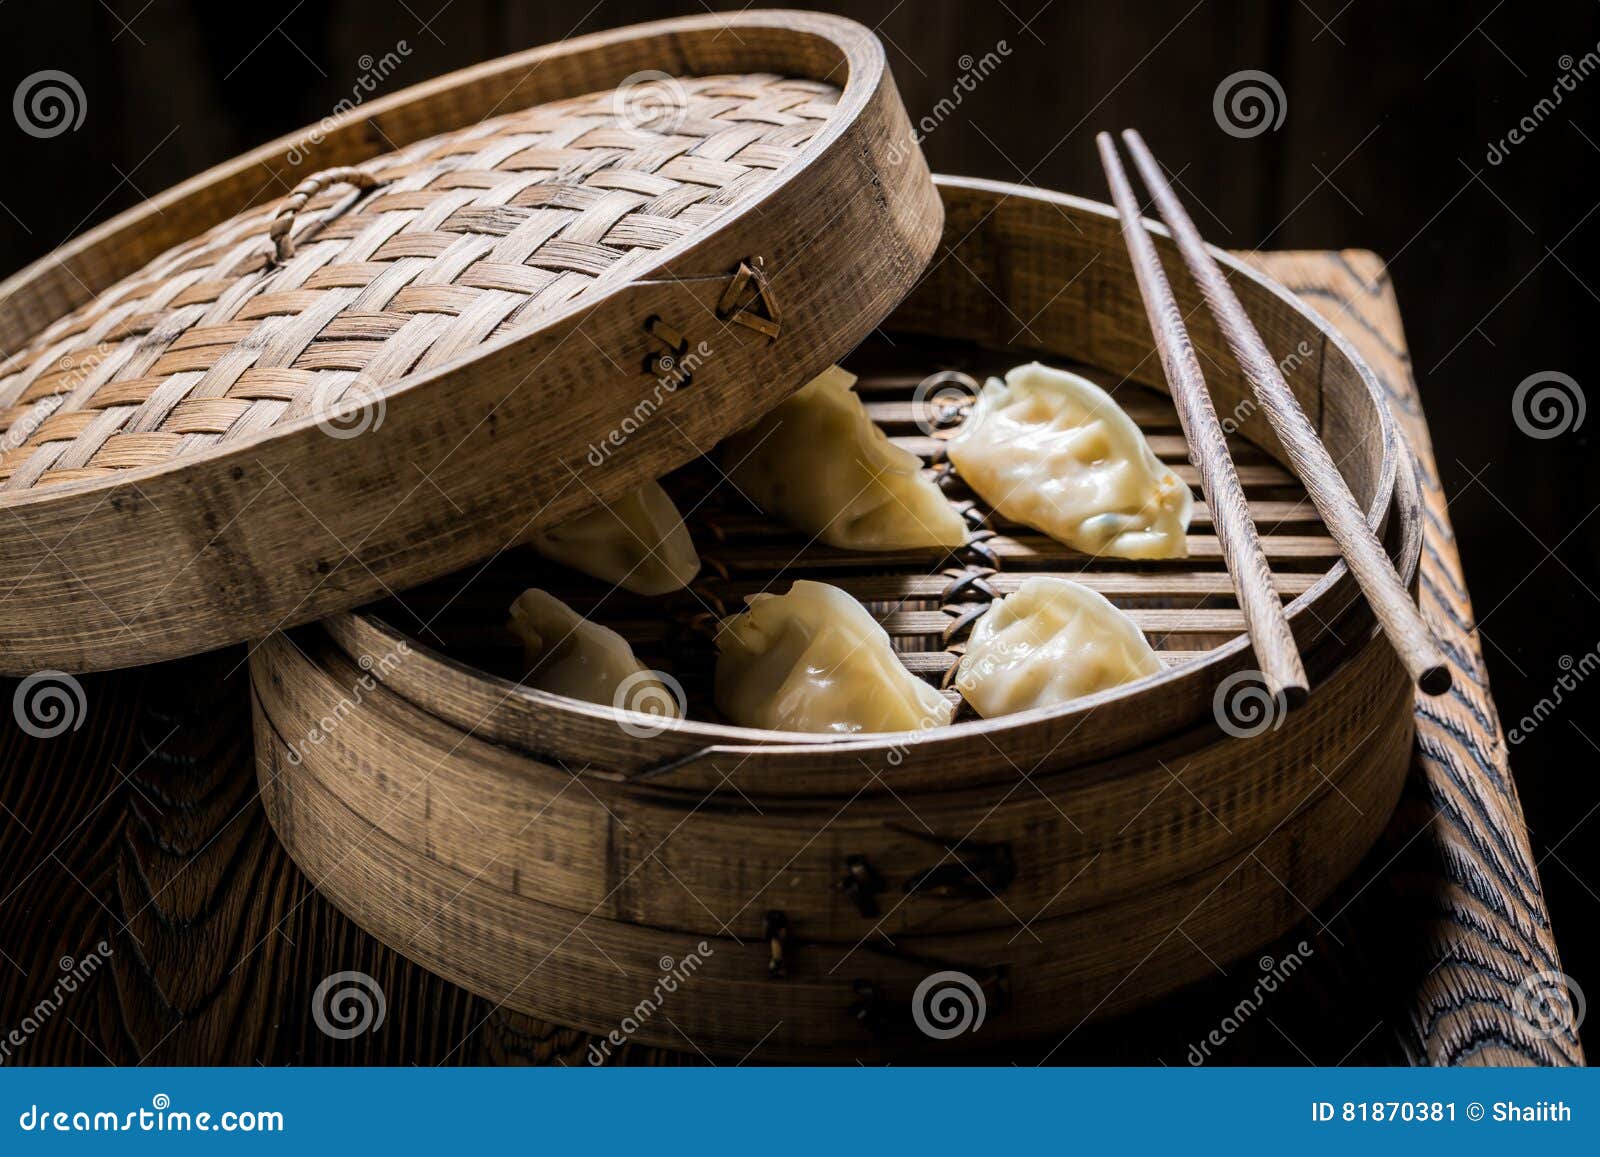 Homemade and Hot Chinese Dumplings in Wooden Steamer Stock Image ...